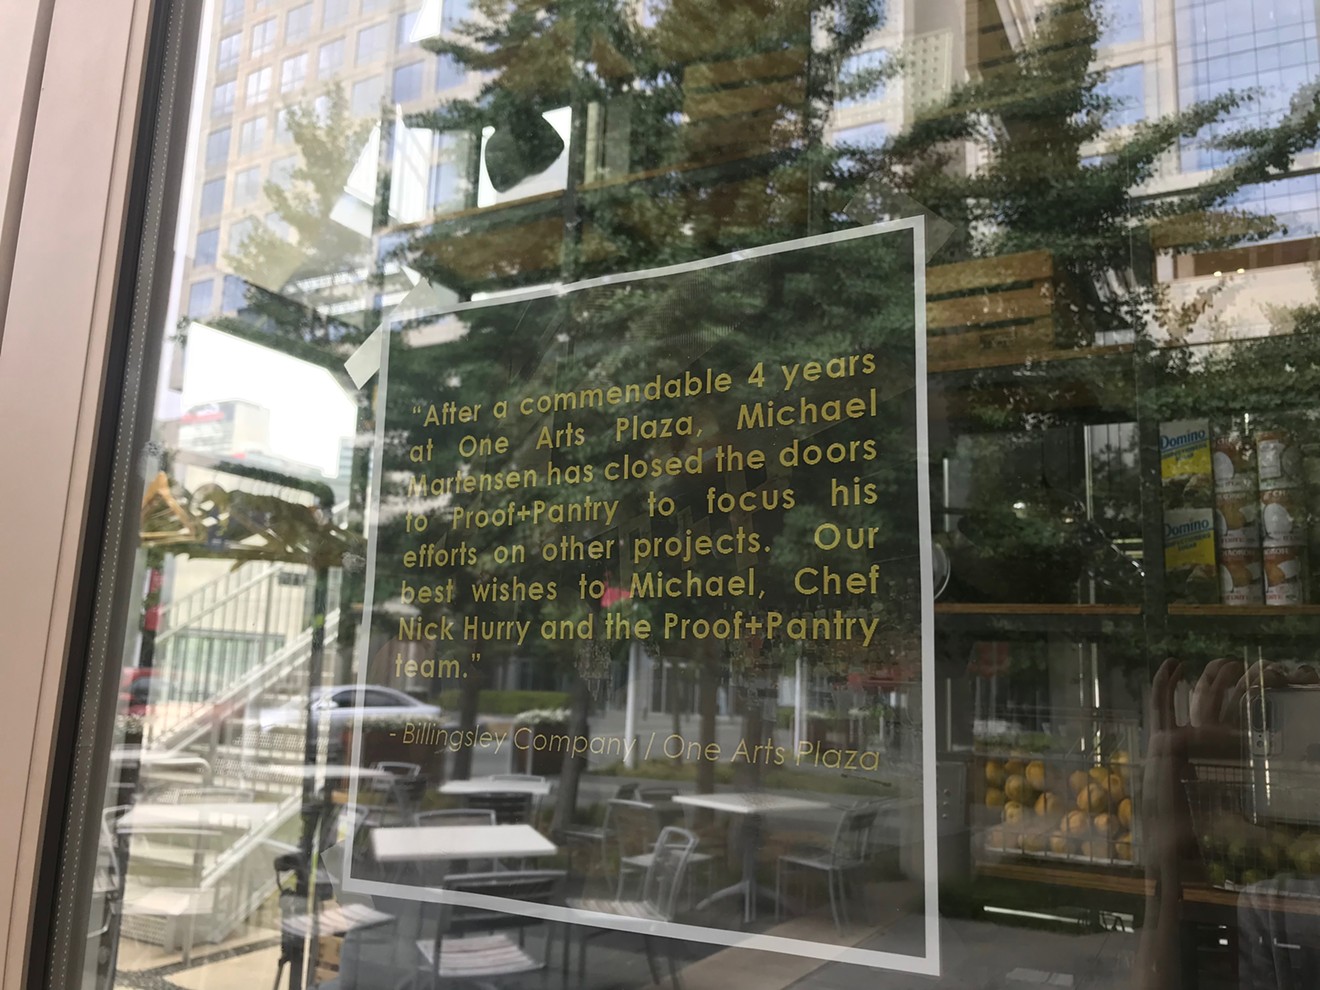 Proof + Pantry has closed, according to signage on the front door of the Arts District restaurant.